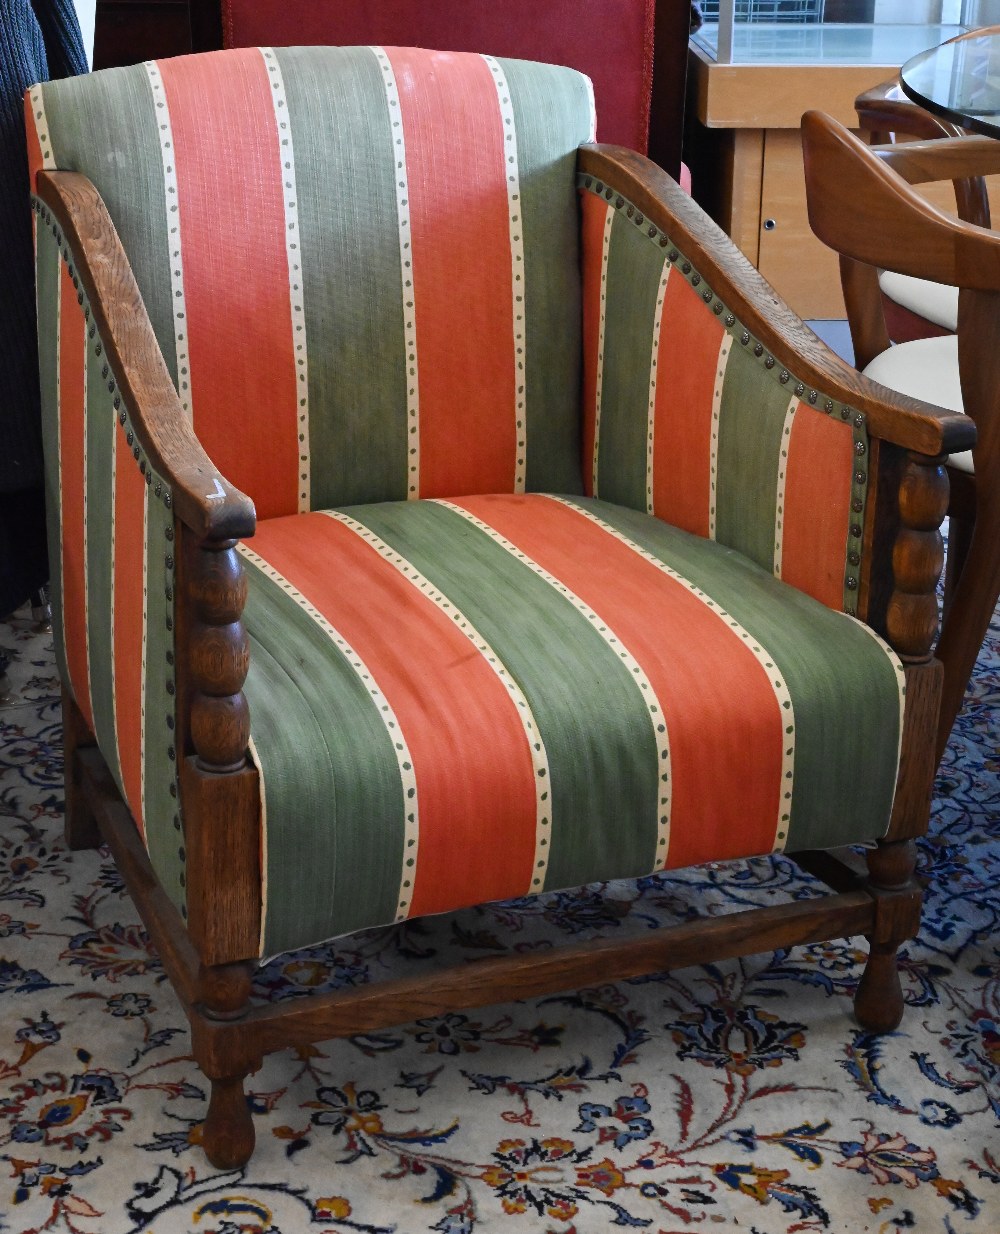 An early 20th century oak framed armchair with green and red striped fabric uphostery